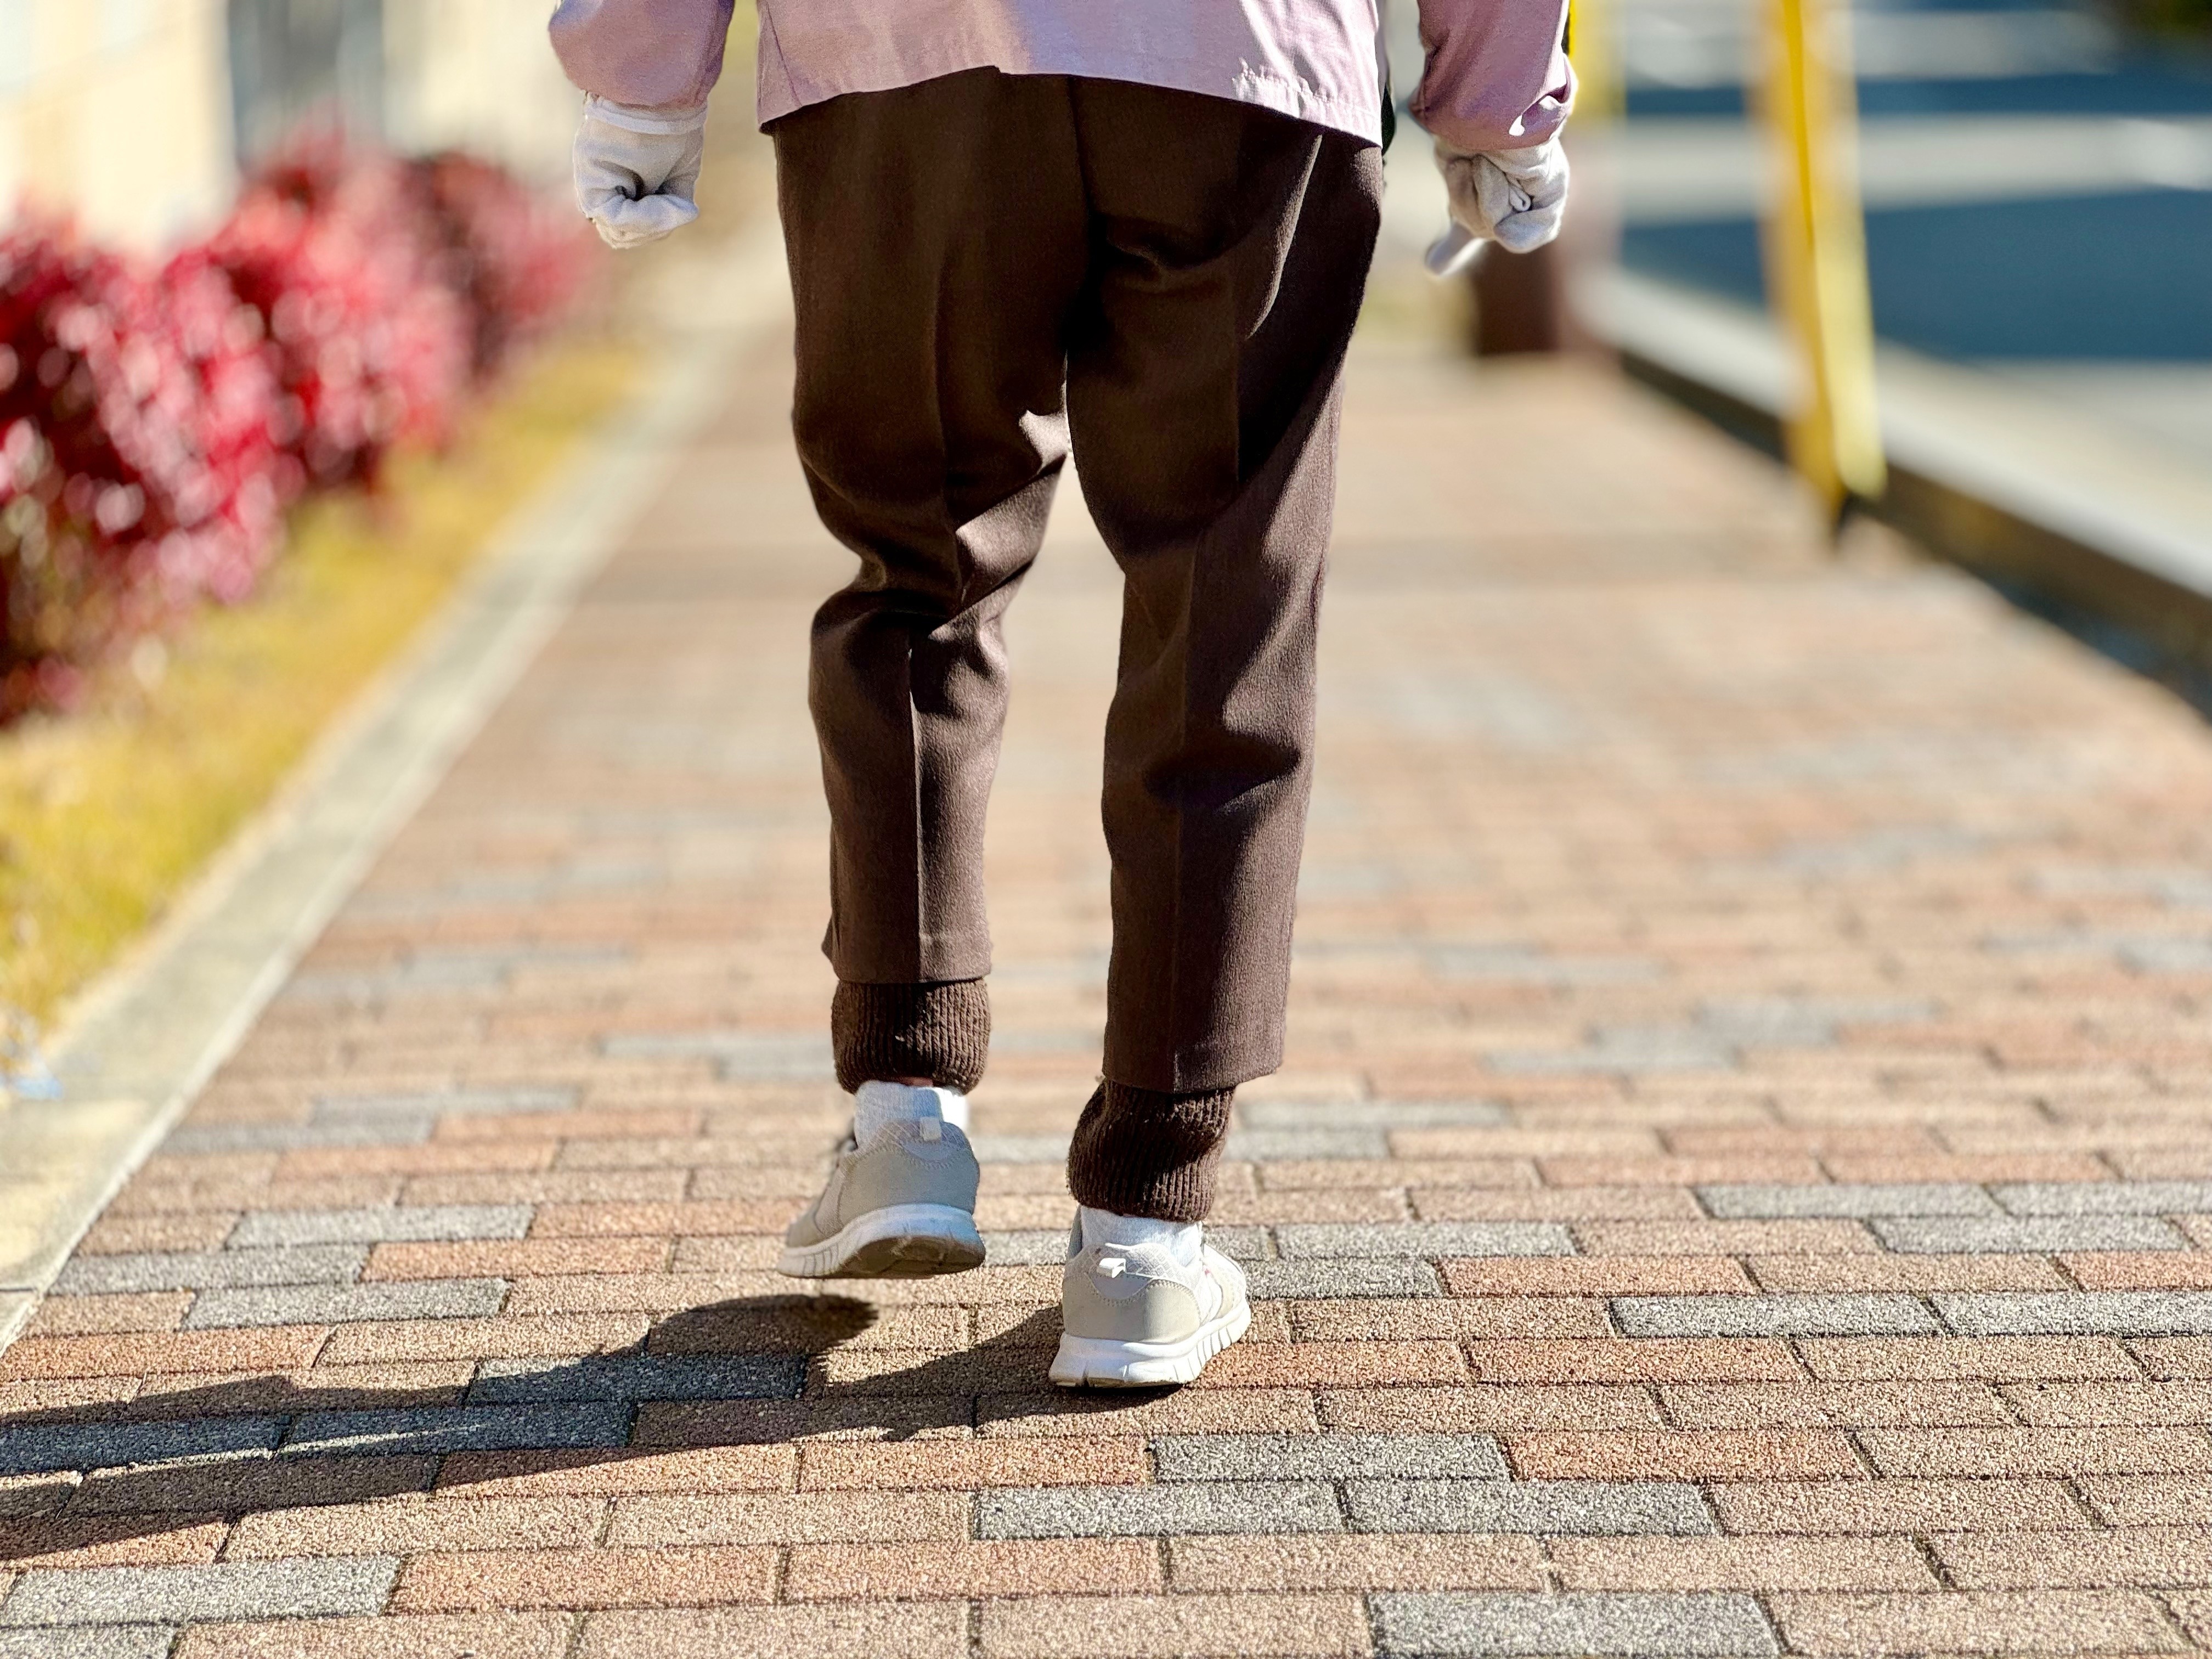 When you walk in a curve, your body has to adjust constantly to maintain balance and direction. Difficulty doing so could be an early sign of dementia, according to a recent study. Photo: Shutterstock